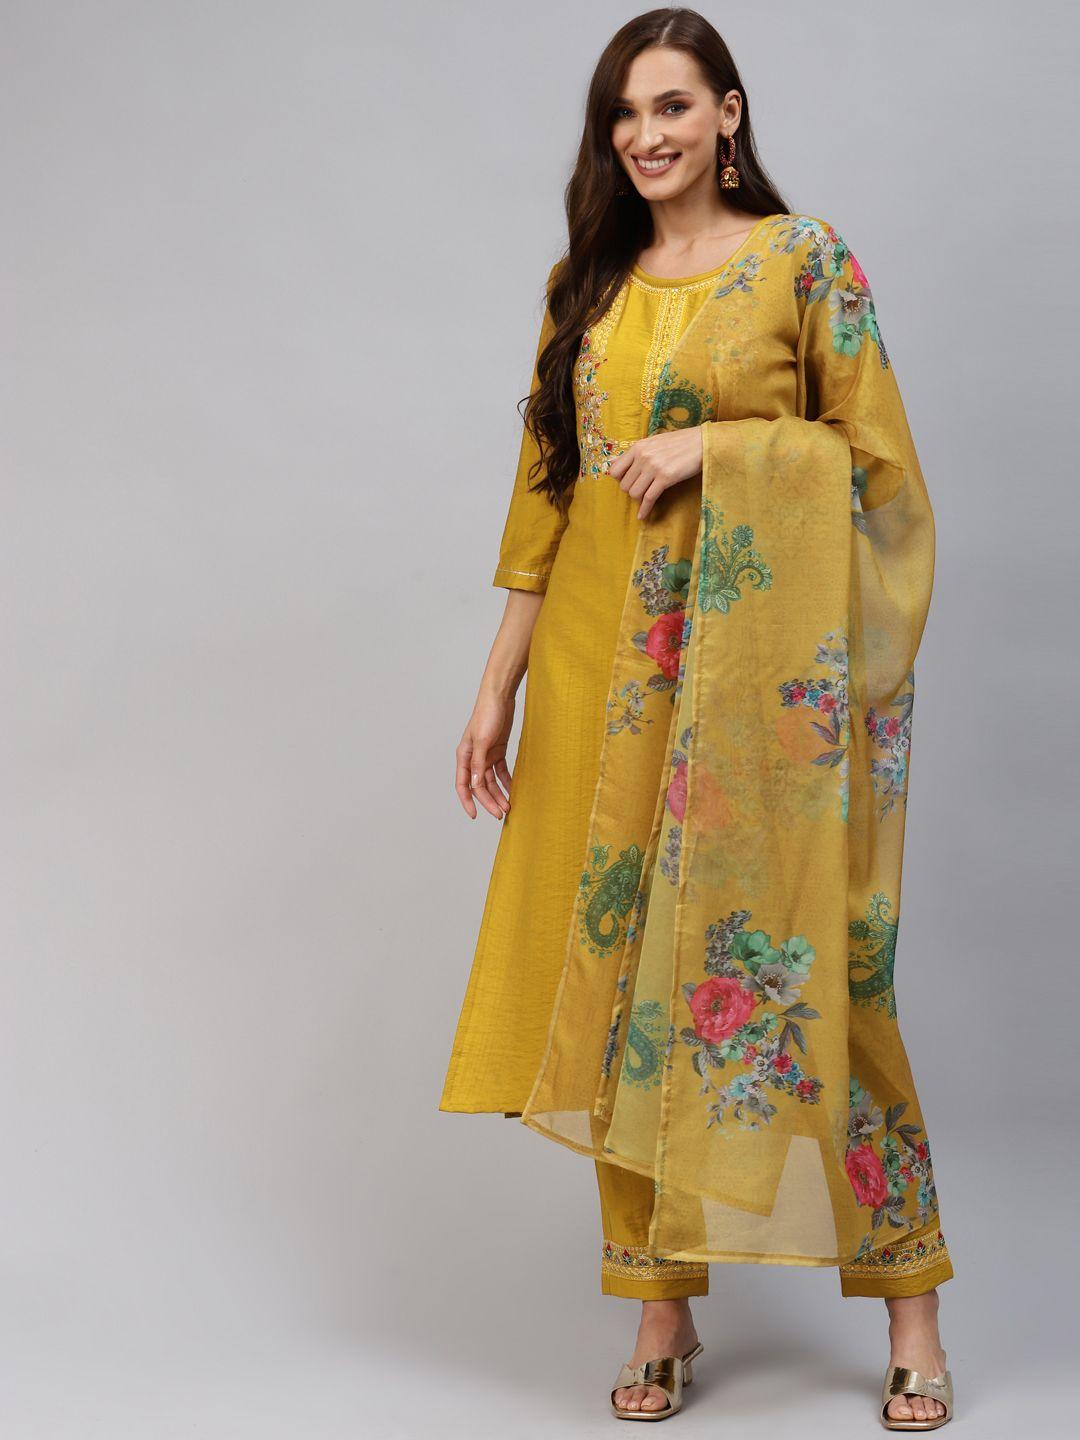 shewill-women-mustard-yellow-floral-embroidered-zardozi-kurta-with-trousers-&-with-dupatta